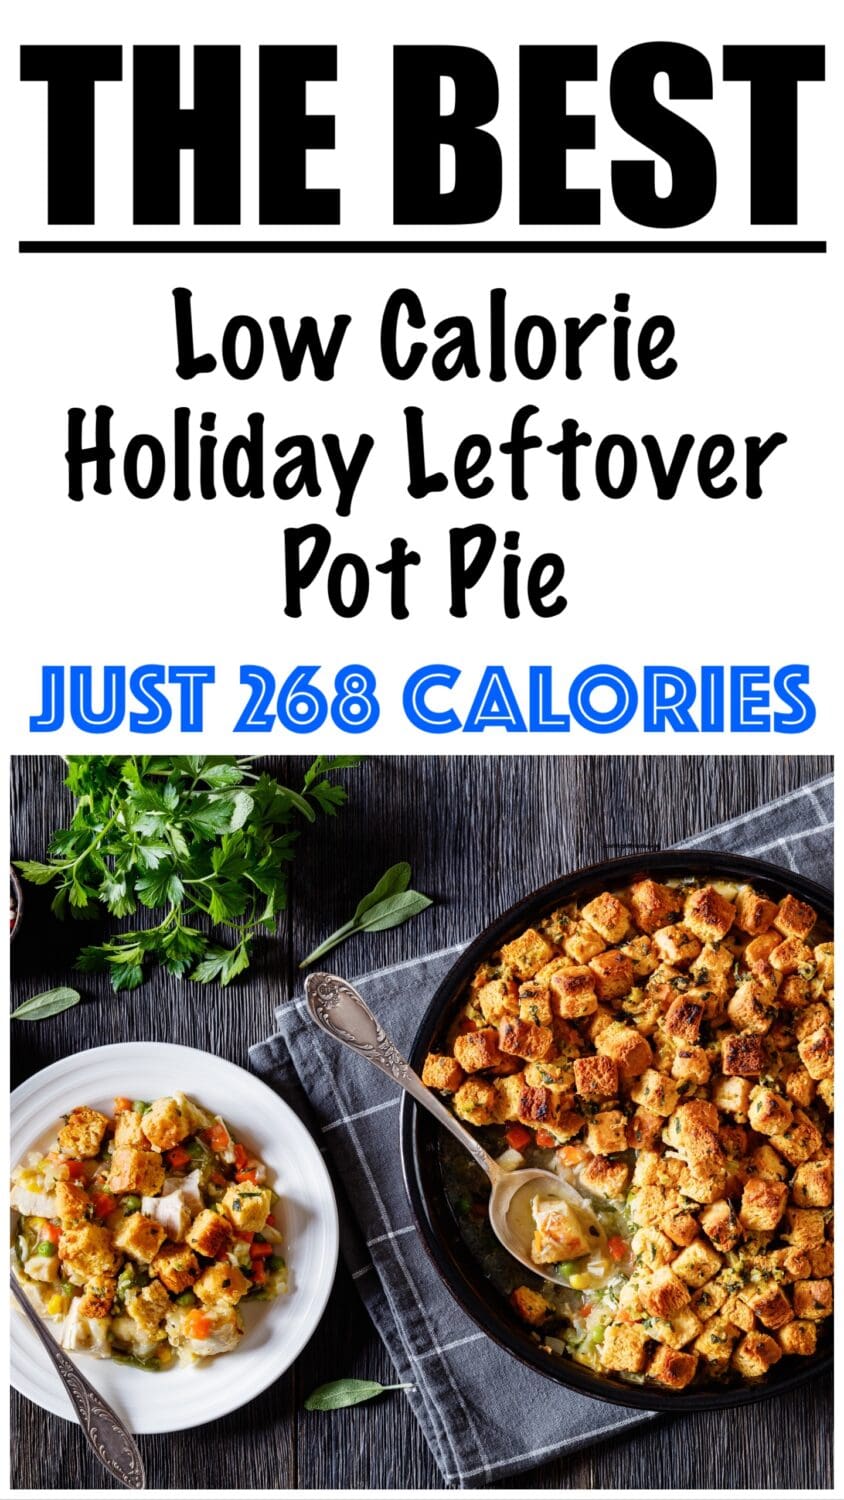 Healthy Leftover Turkey Pot Pie with Stuffing Crust